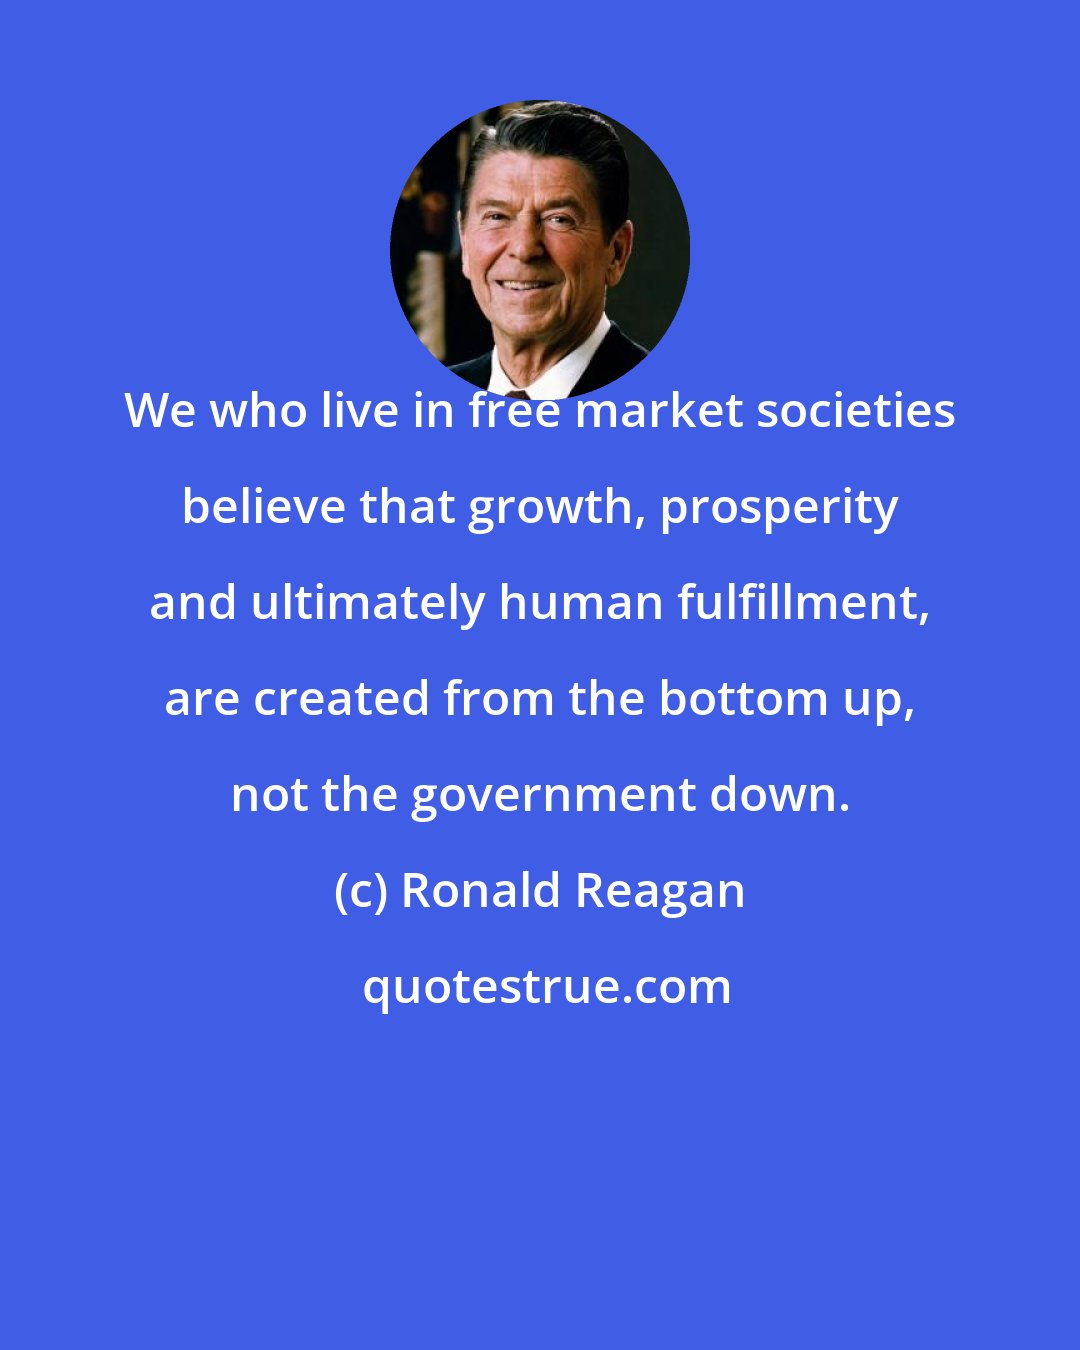 Ronald Reagan: We who live in free market societies believe that growth, prosperity and ultimately human fulfillment, are created from the bottom up, not the government down.